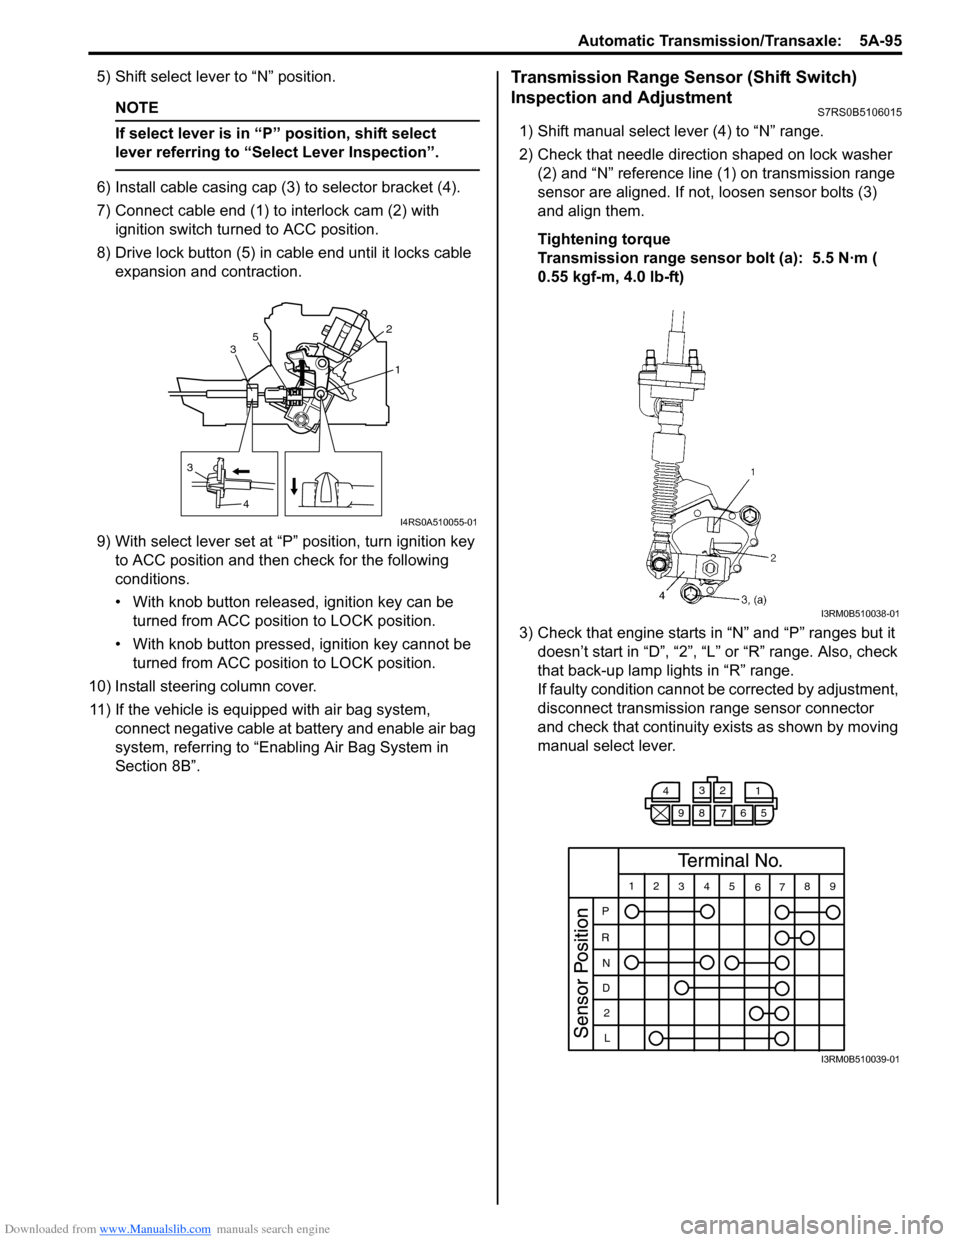 SUZUKI SWIFT 2005 2.G Service Workshop Manual Downloaded from www.Manualslib.com manuals search engine Automatic Transmission/Transaxle:  5A-95
5) Shift select lever to “N” position.
NOTE
If select lever is in “P” position, shift select 
